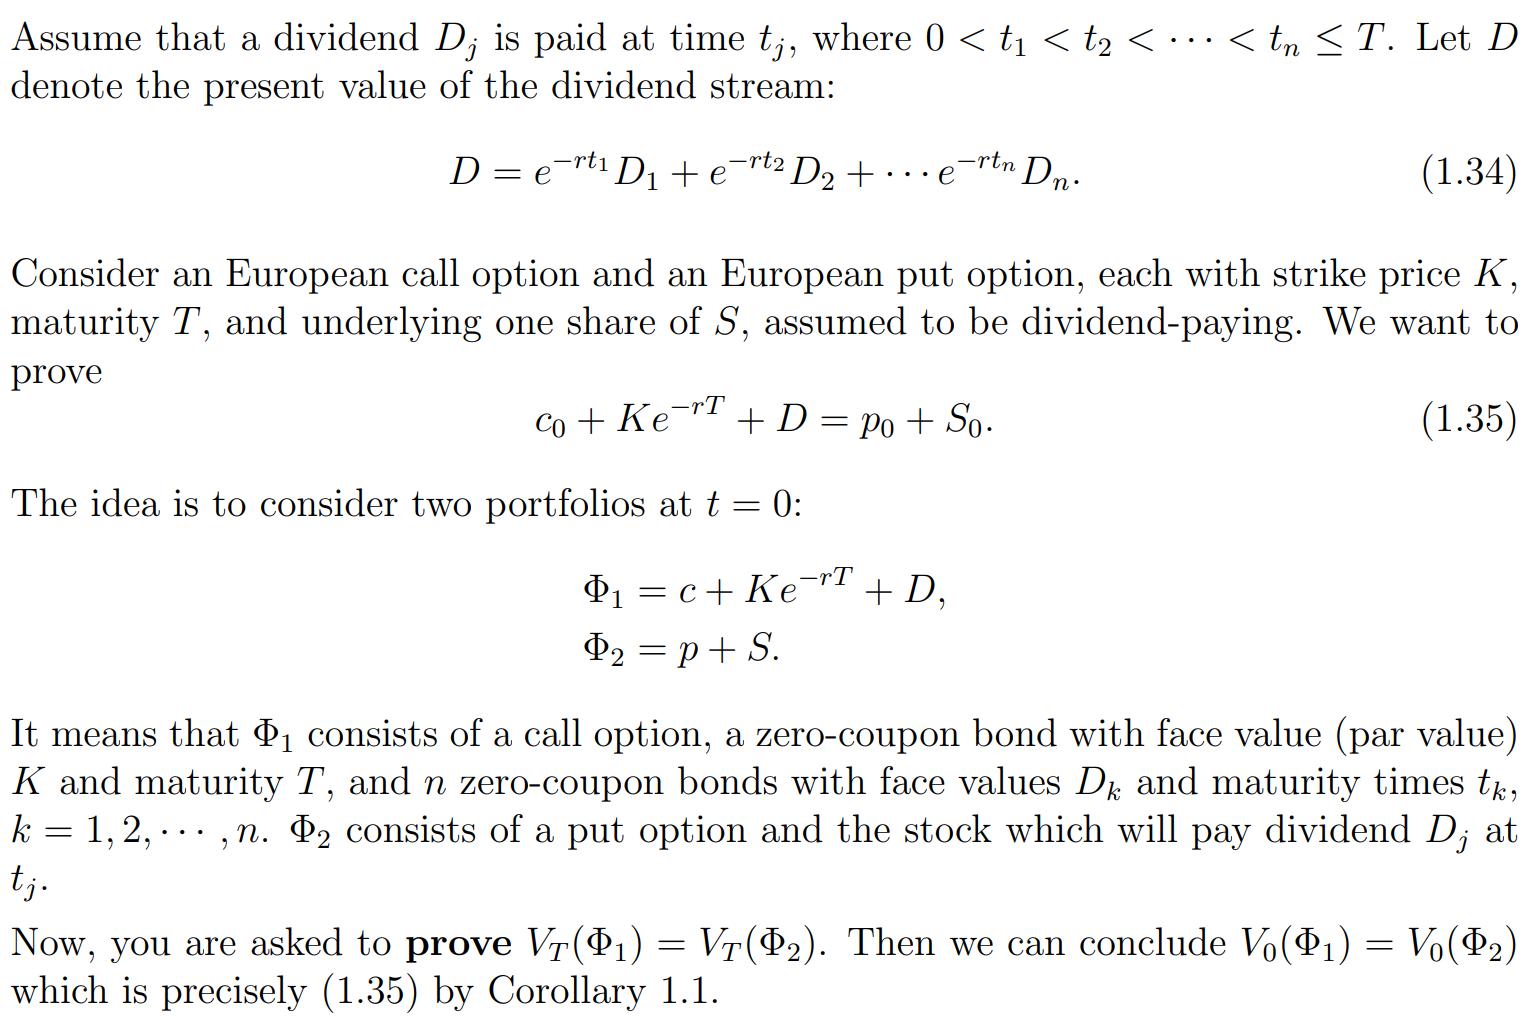 Assume that a dividend D, is paid at time tj, where 0